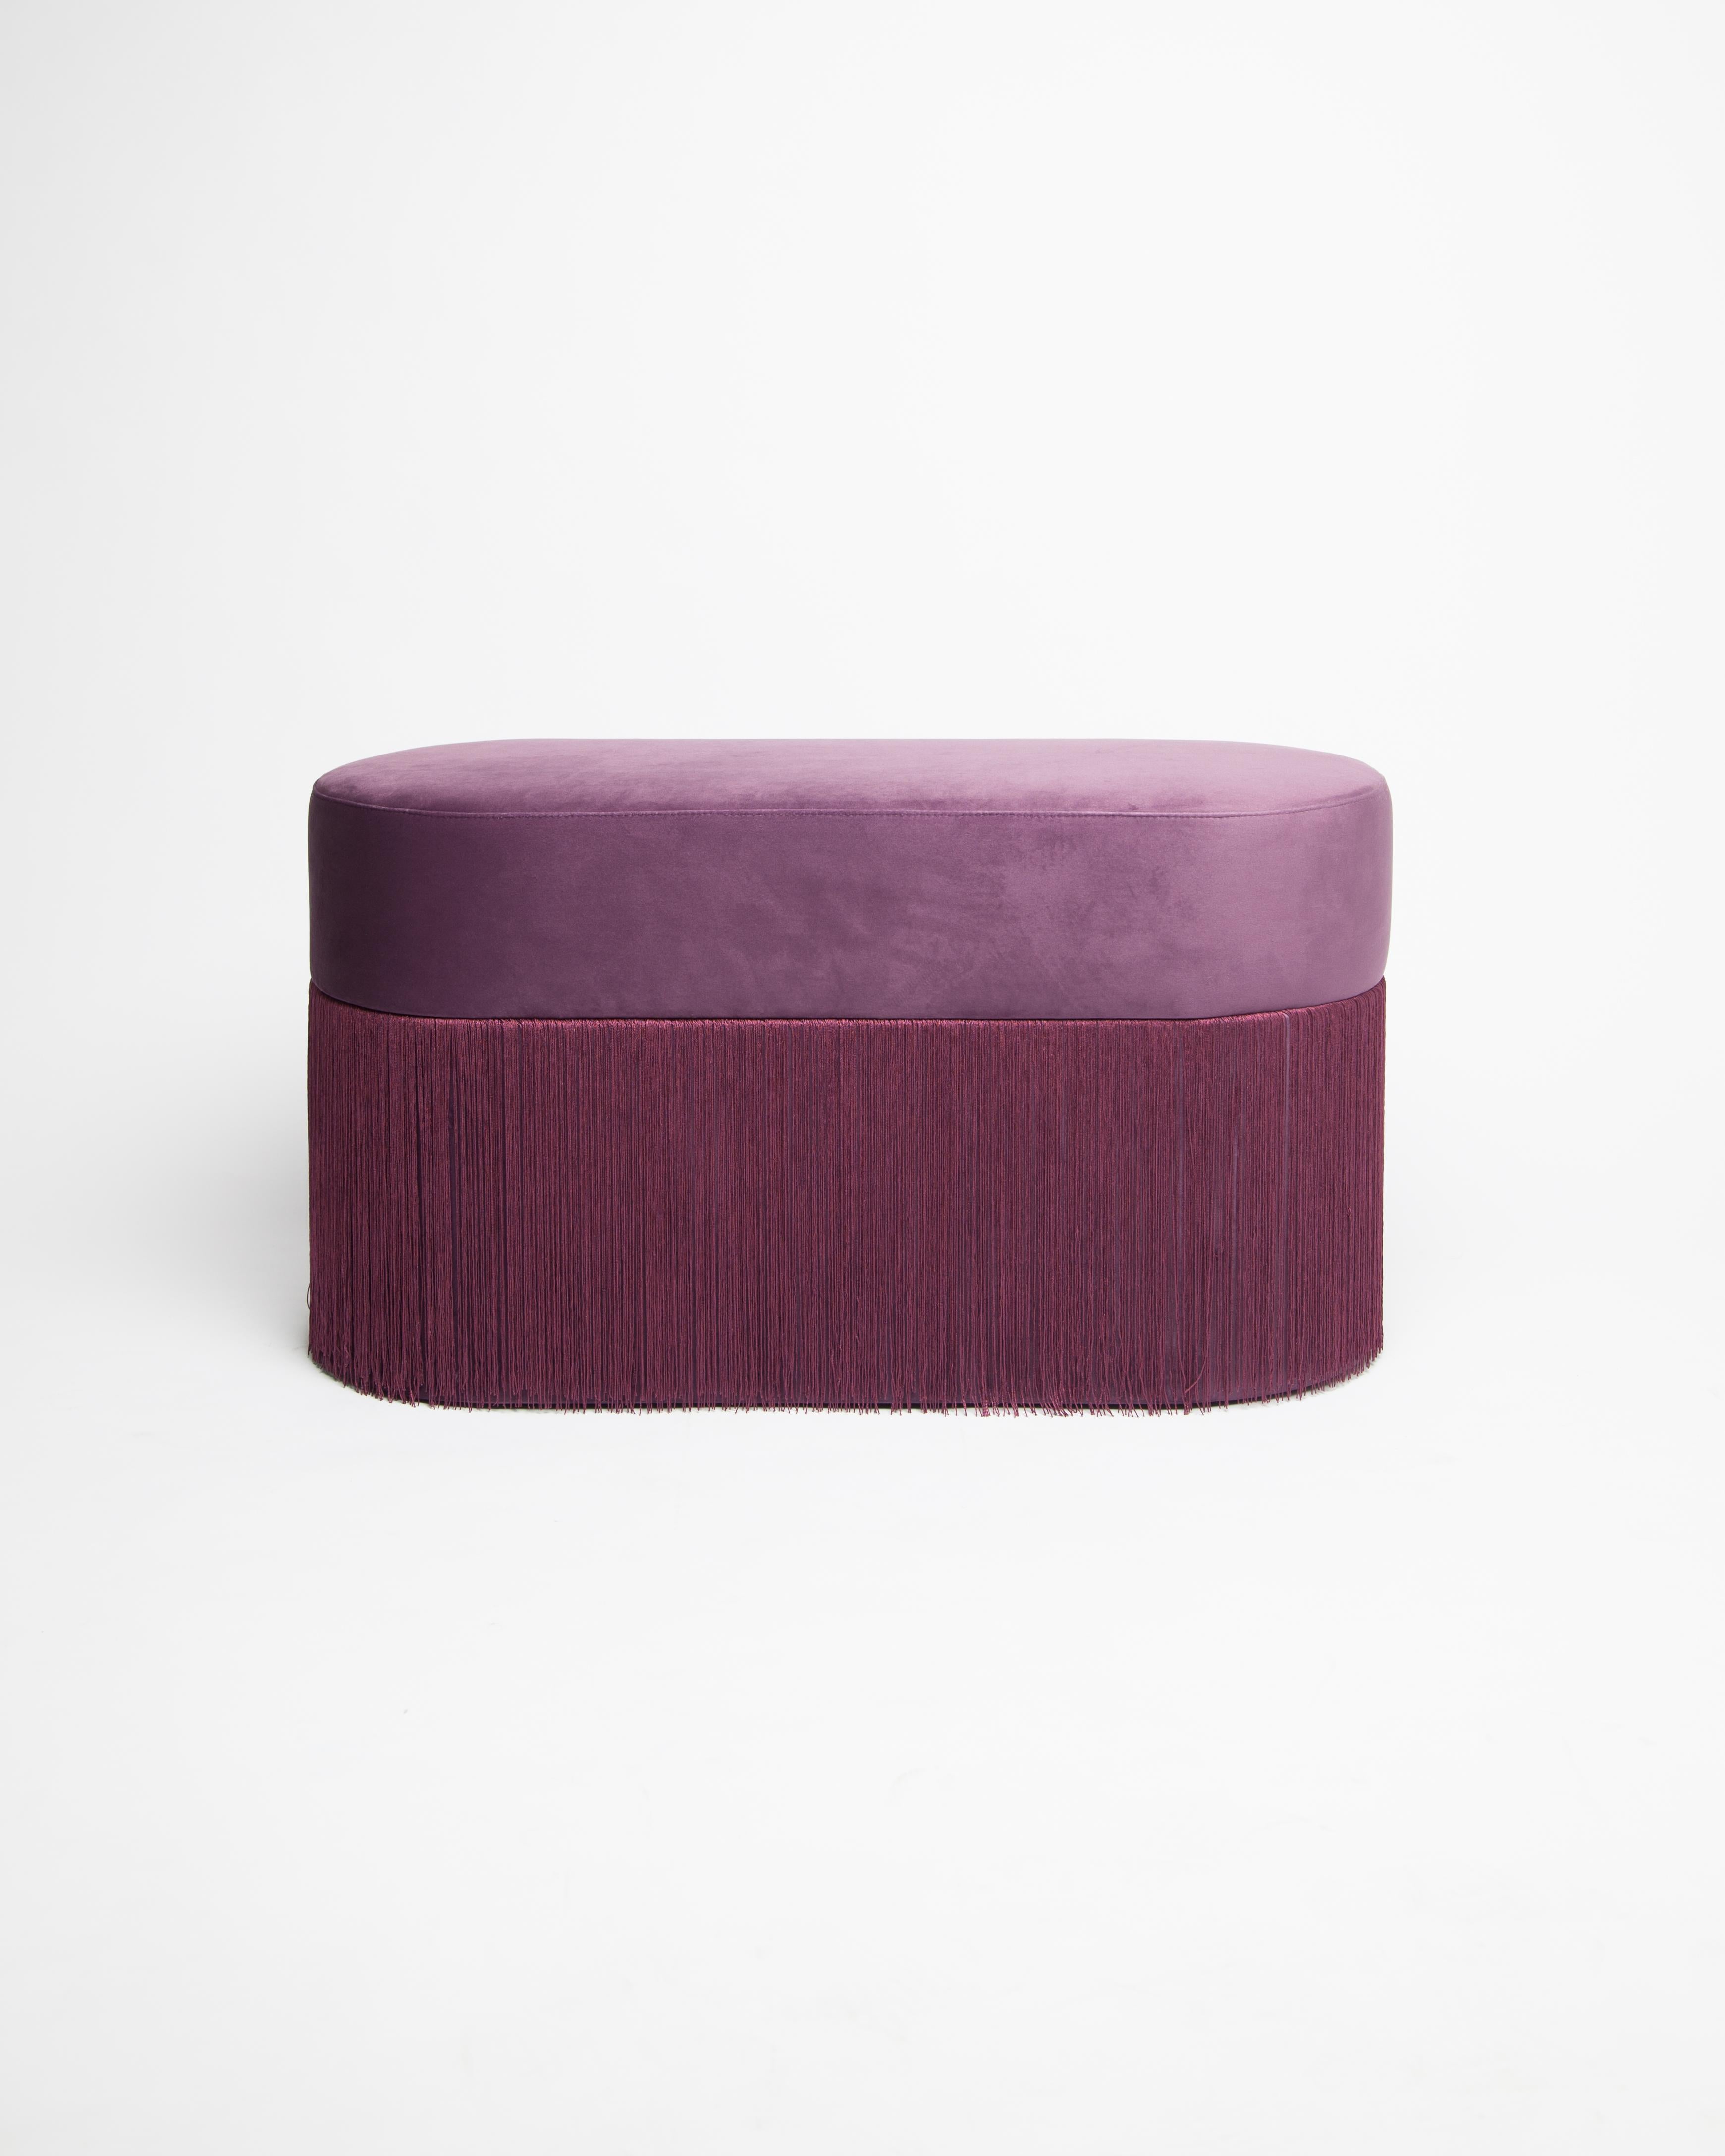 Spanish Pair of Pouf Pill Small and Large Purple in Velvet Upholstery and Fringes For Sale